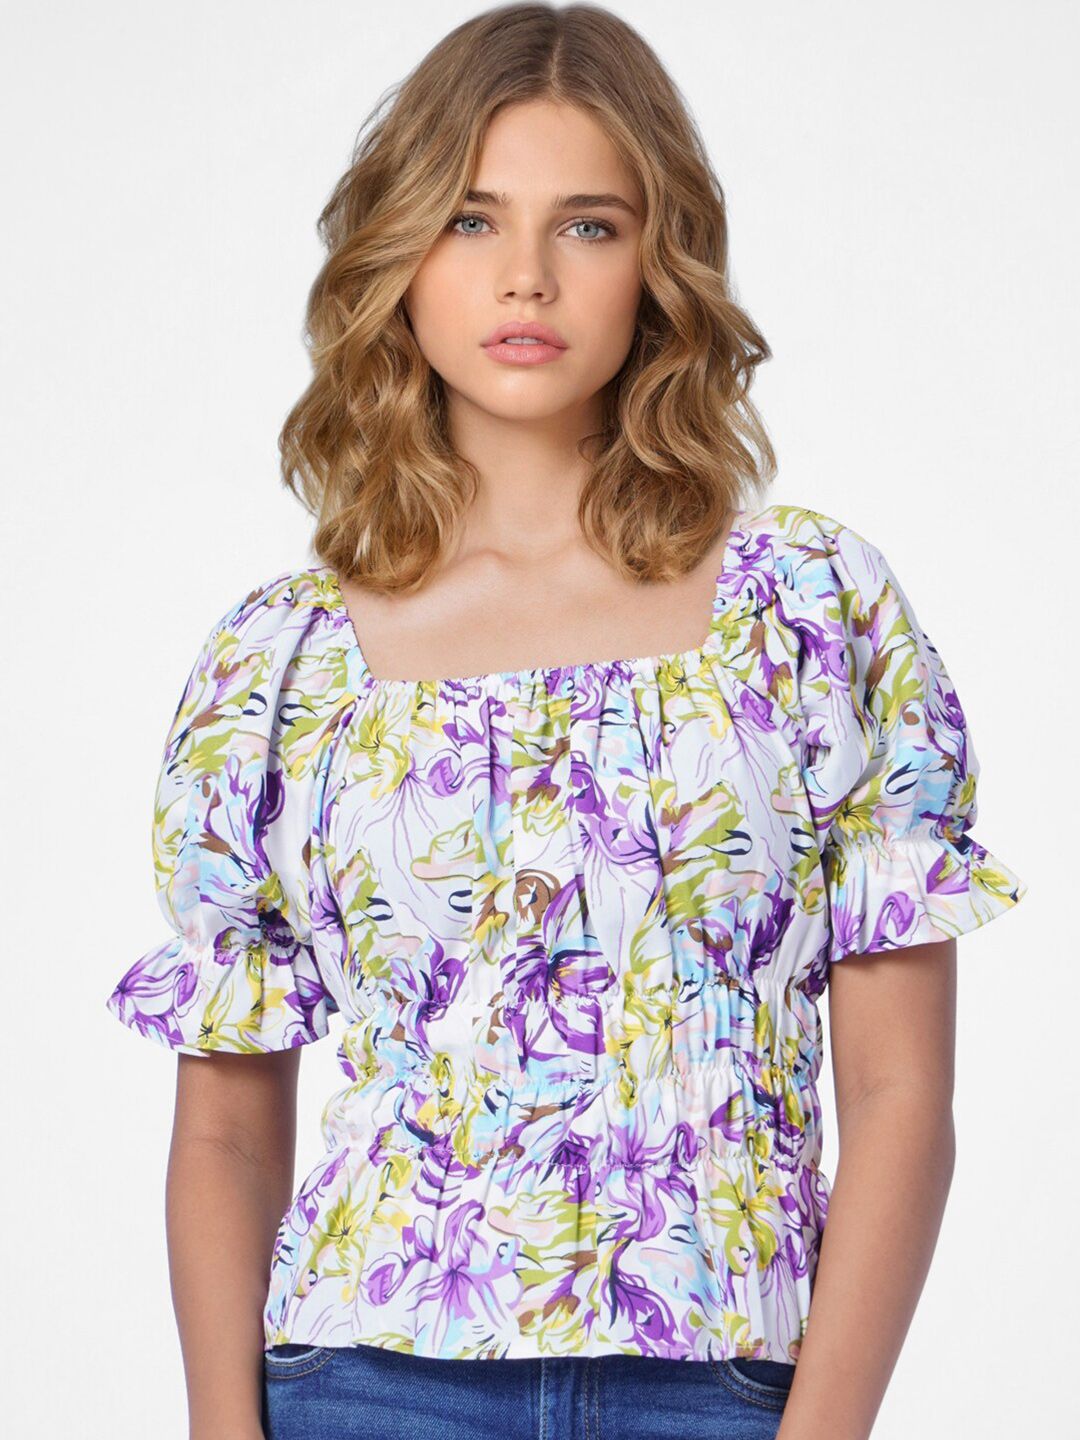 ONLY Women White & Purple Floral Print Top Price in India